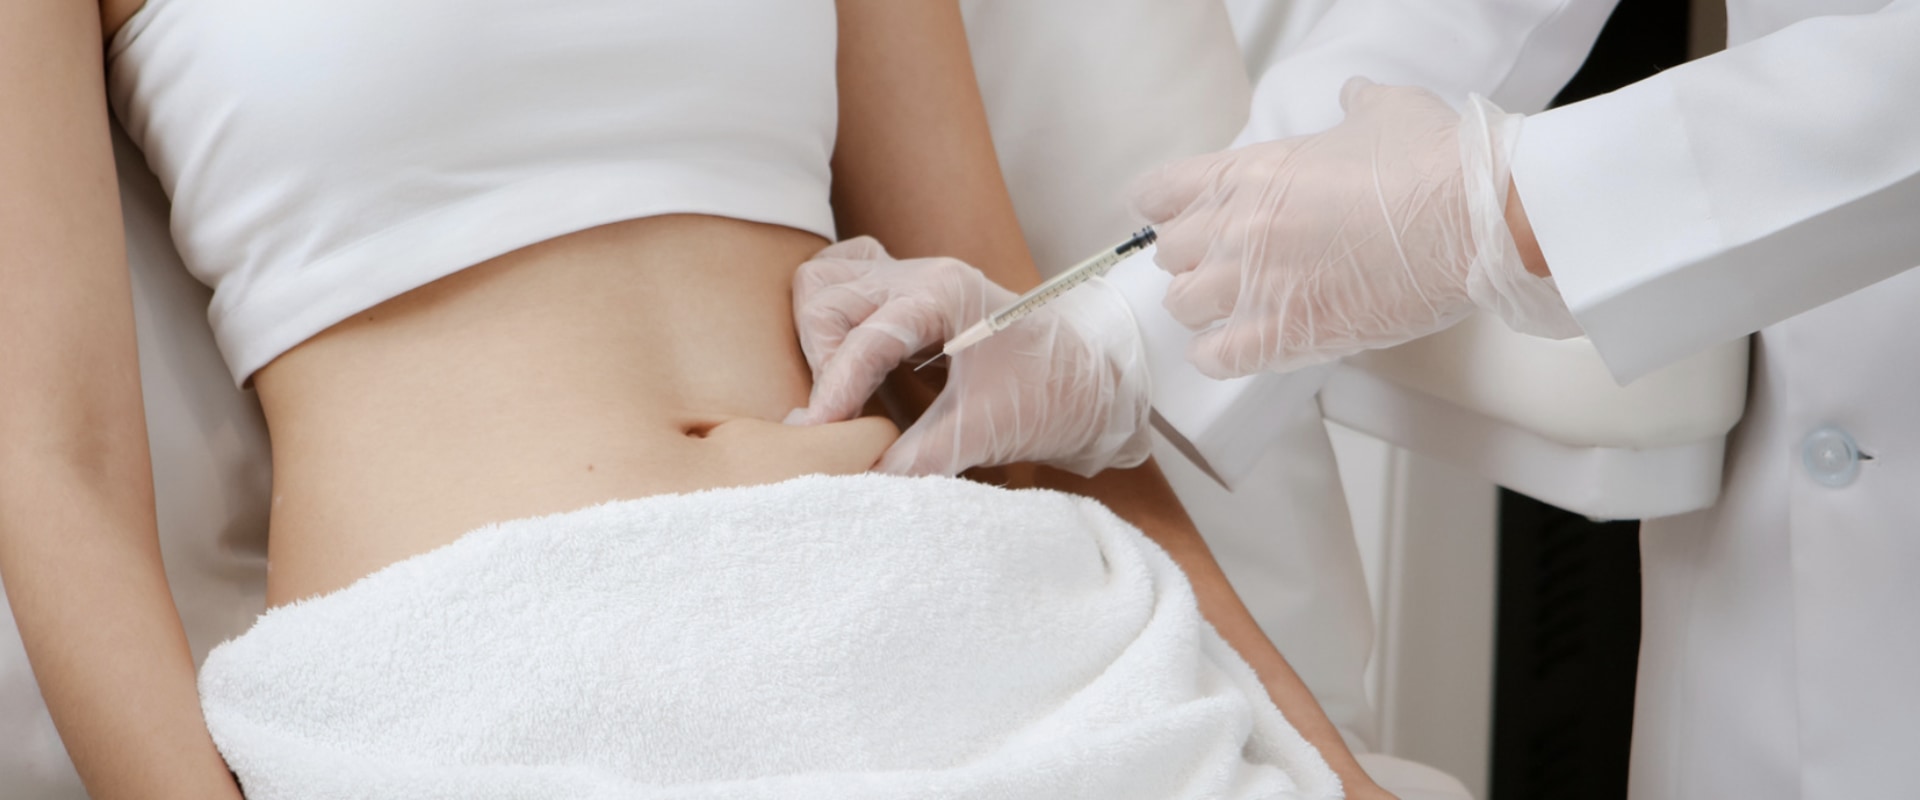 Are Fat Reduction Treatments Permanent?